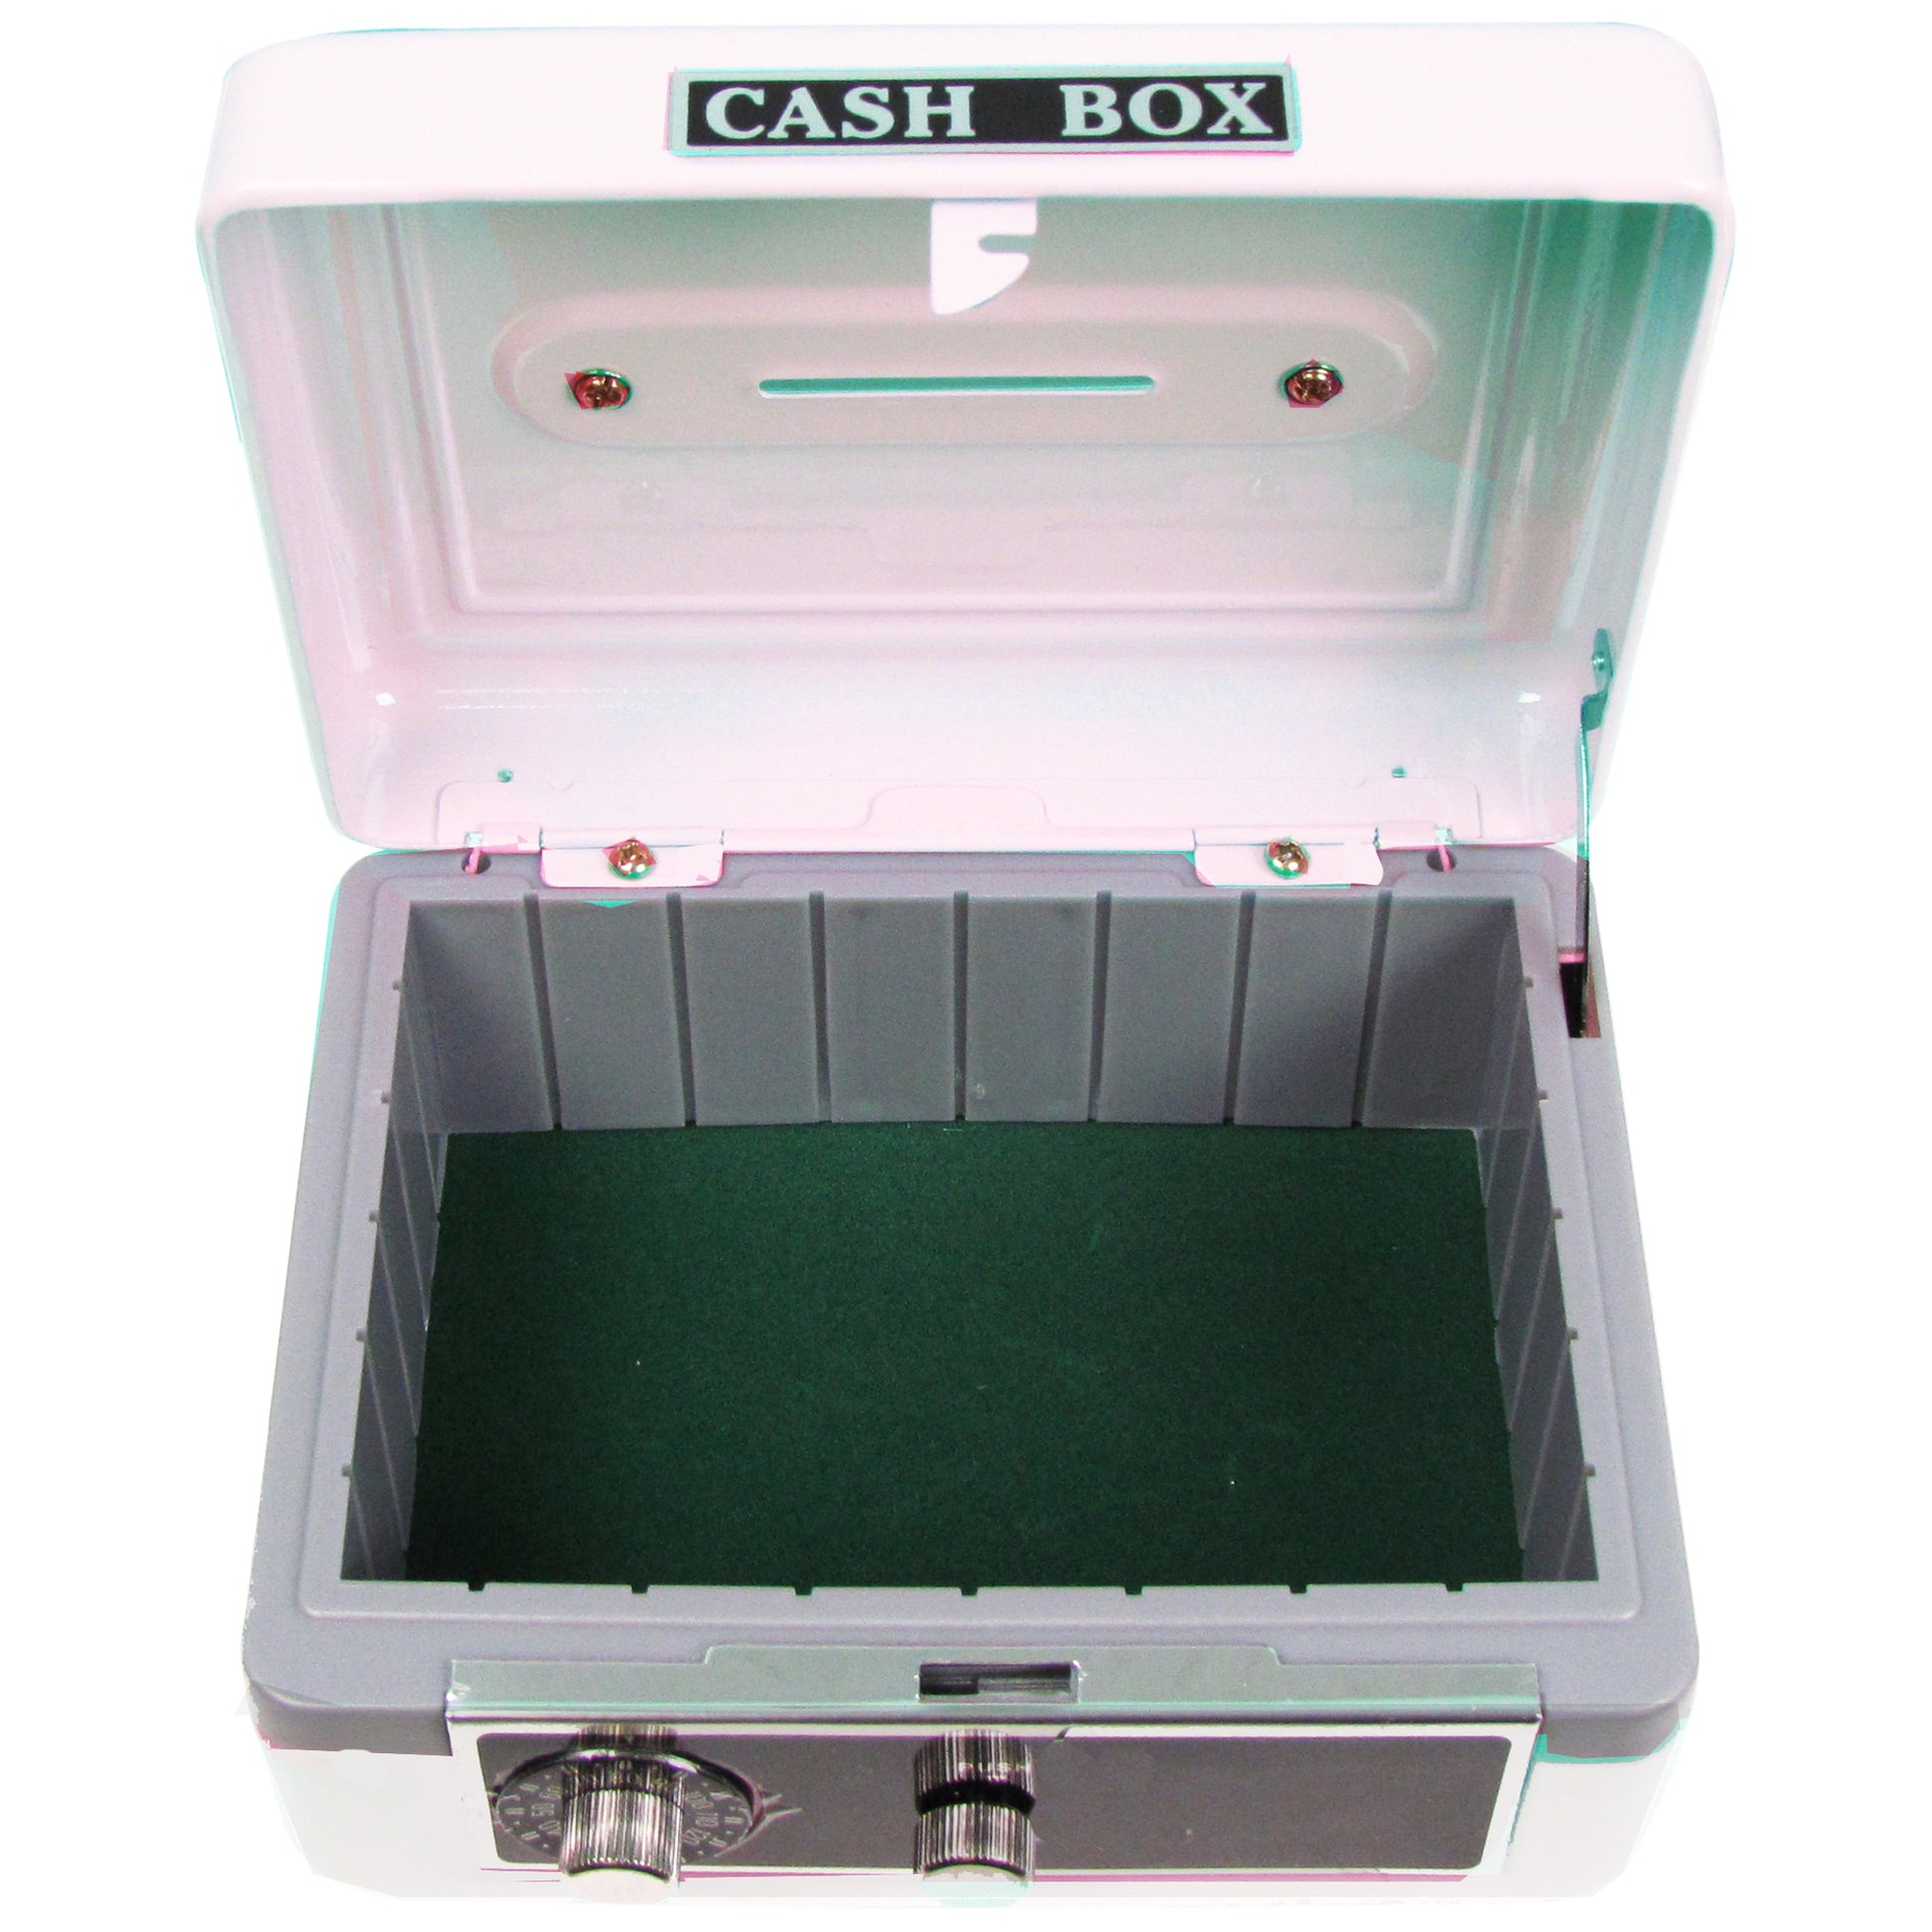 Personalized White Cash Box with Dinosaurs design